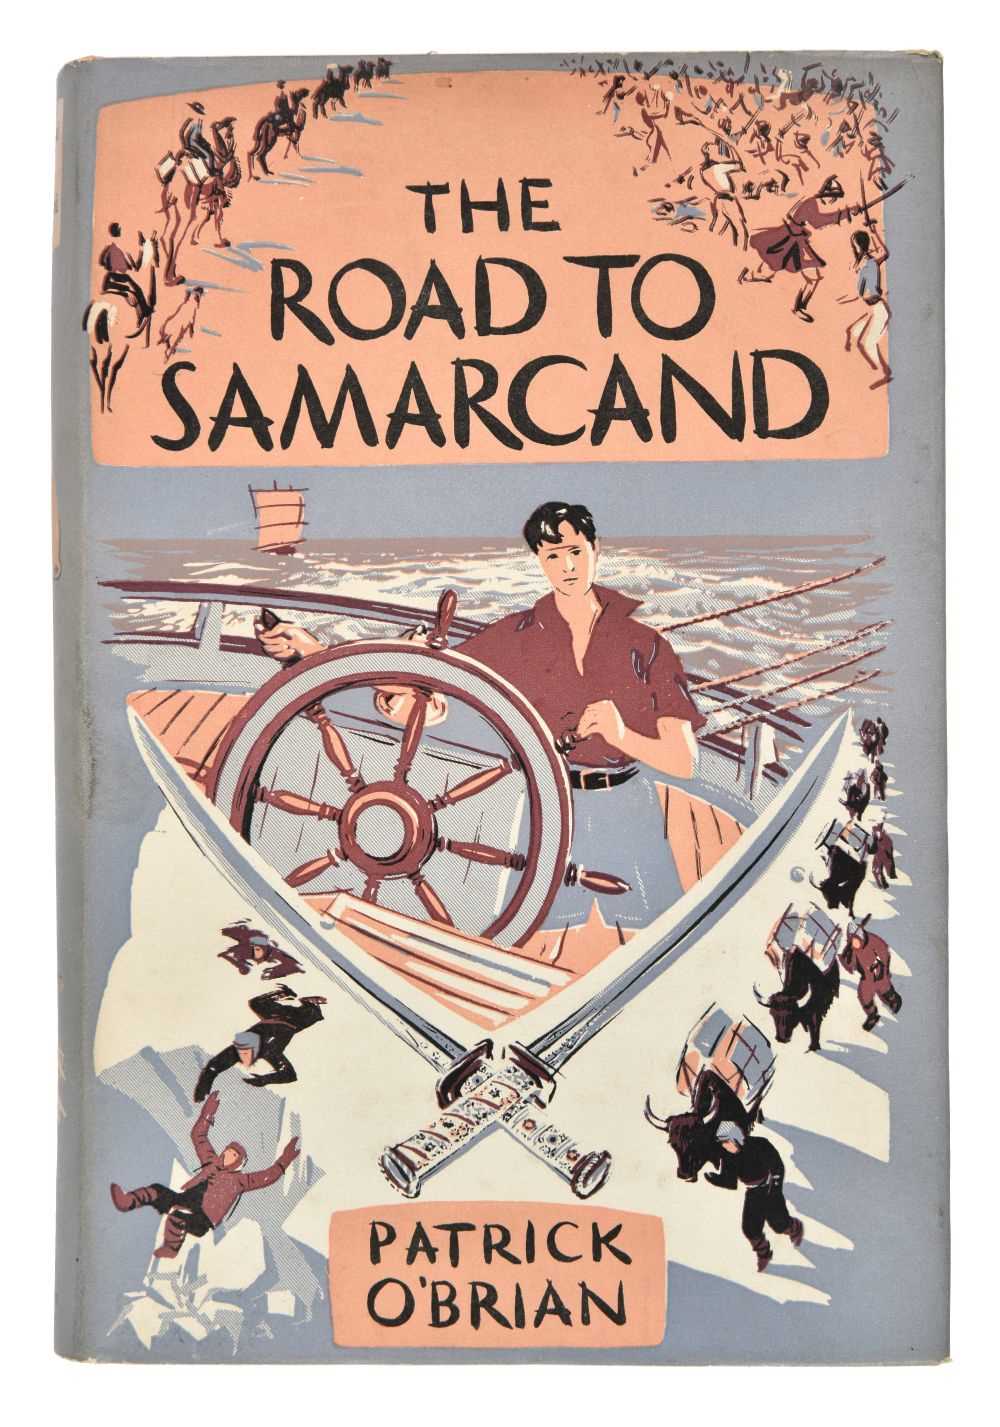 Lot 733 - O'Brian (Patrick). The Road to Samarcand, 1st edition, 1954